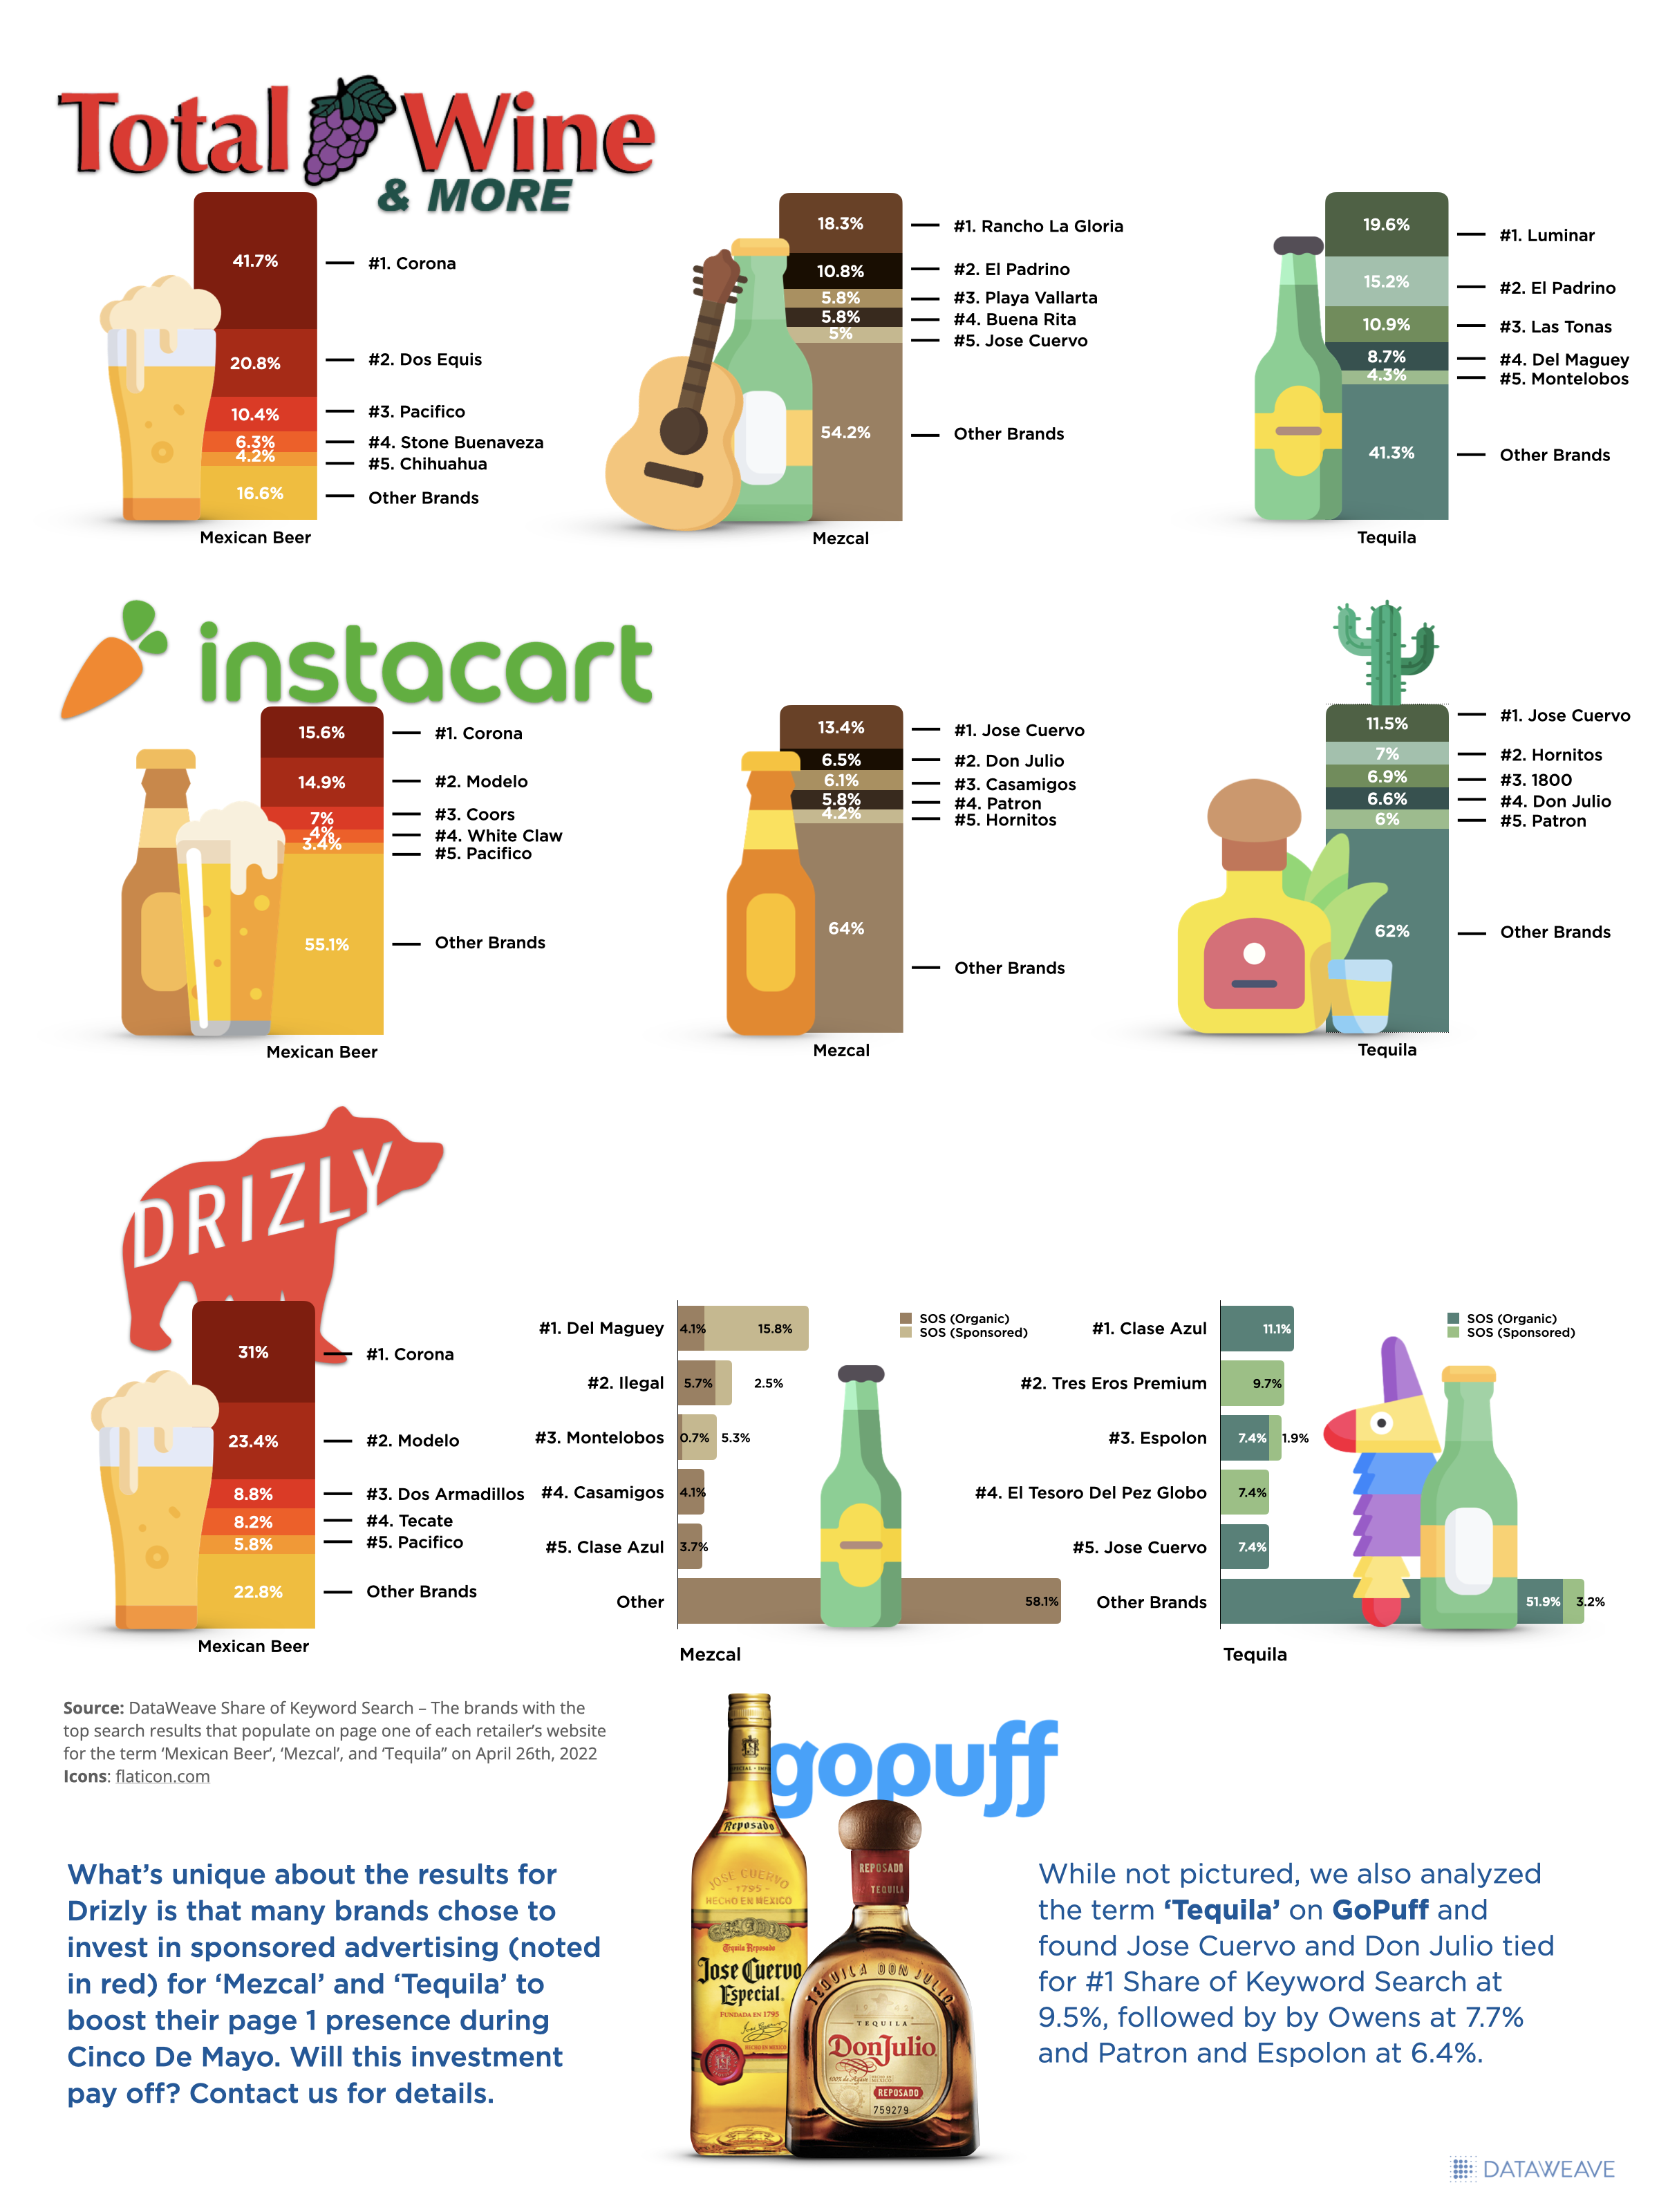 TotalWine, Instacart, Drizly, and GoPuff of Search - Beer, Mezcal, and Tequila Keywords on Cinco de Mayo 2022